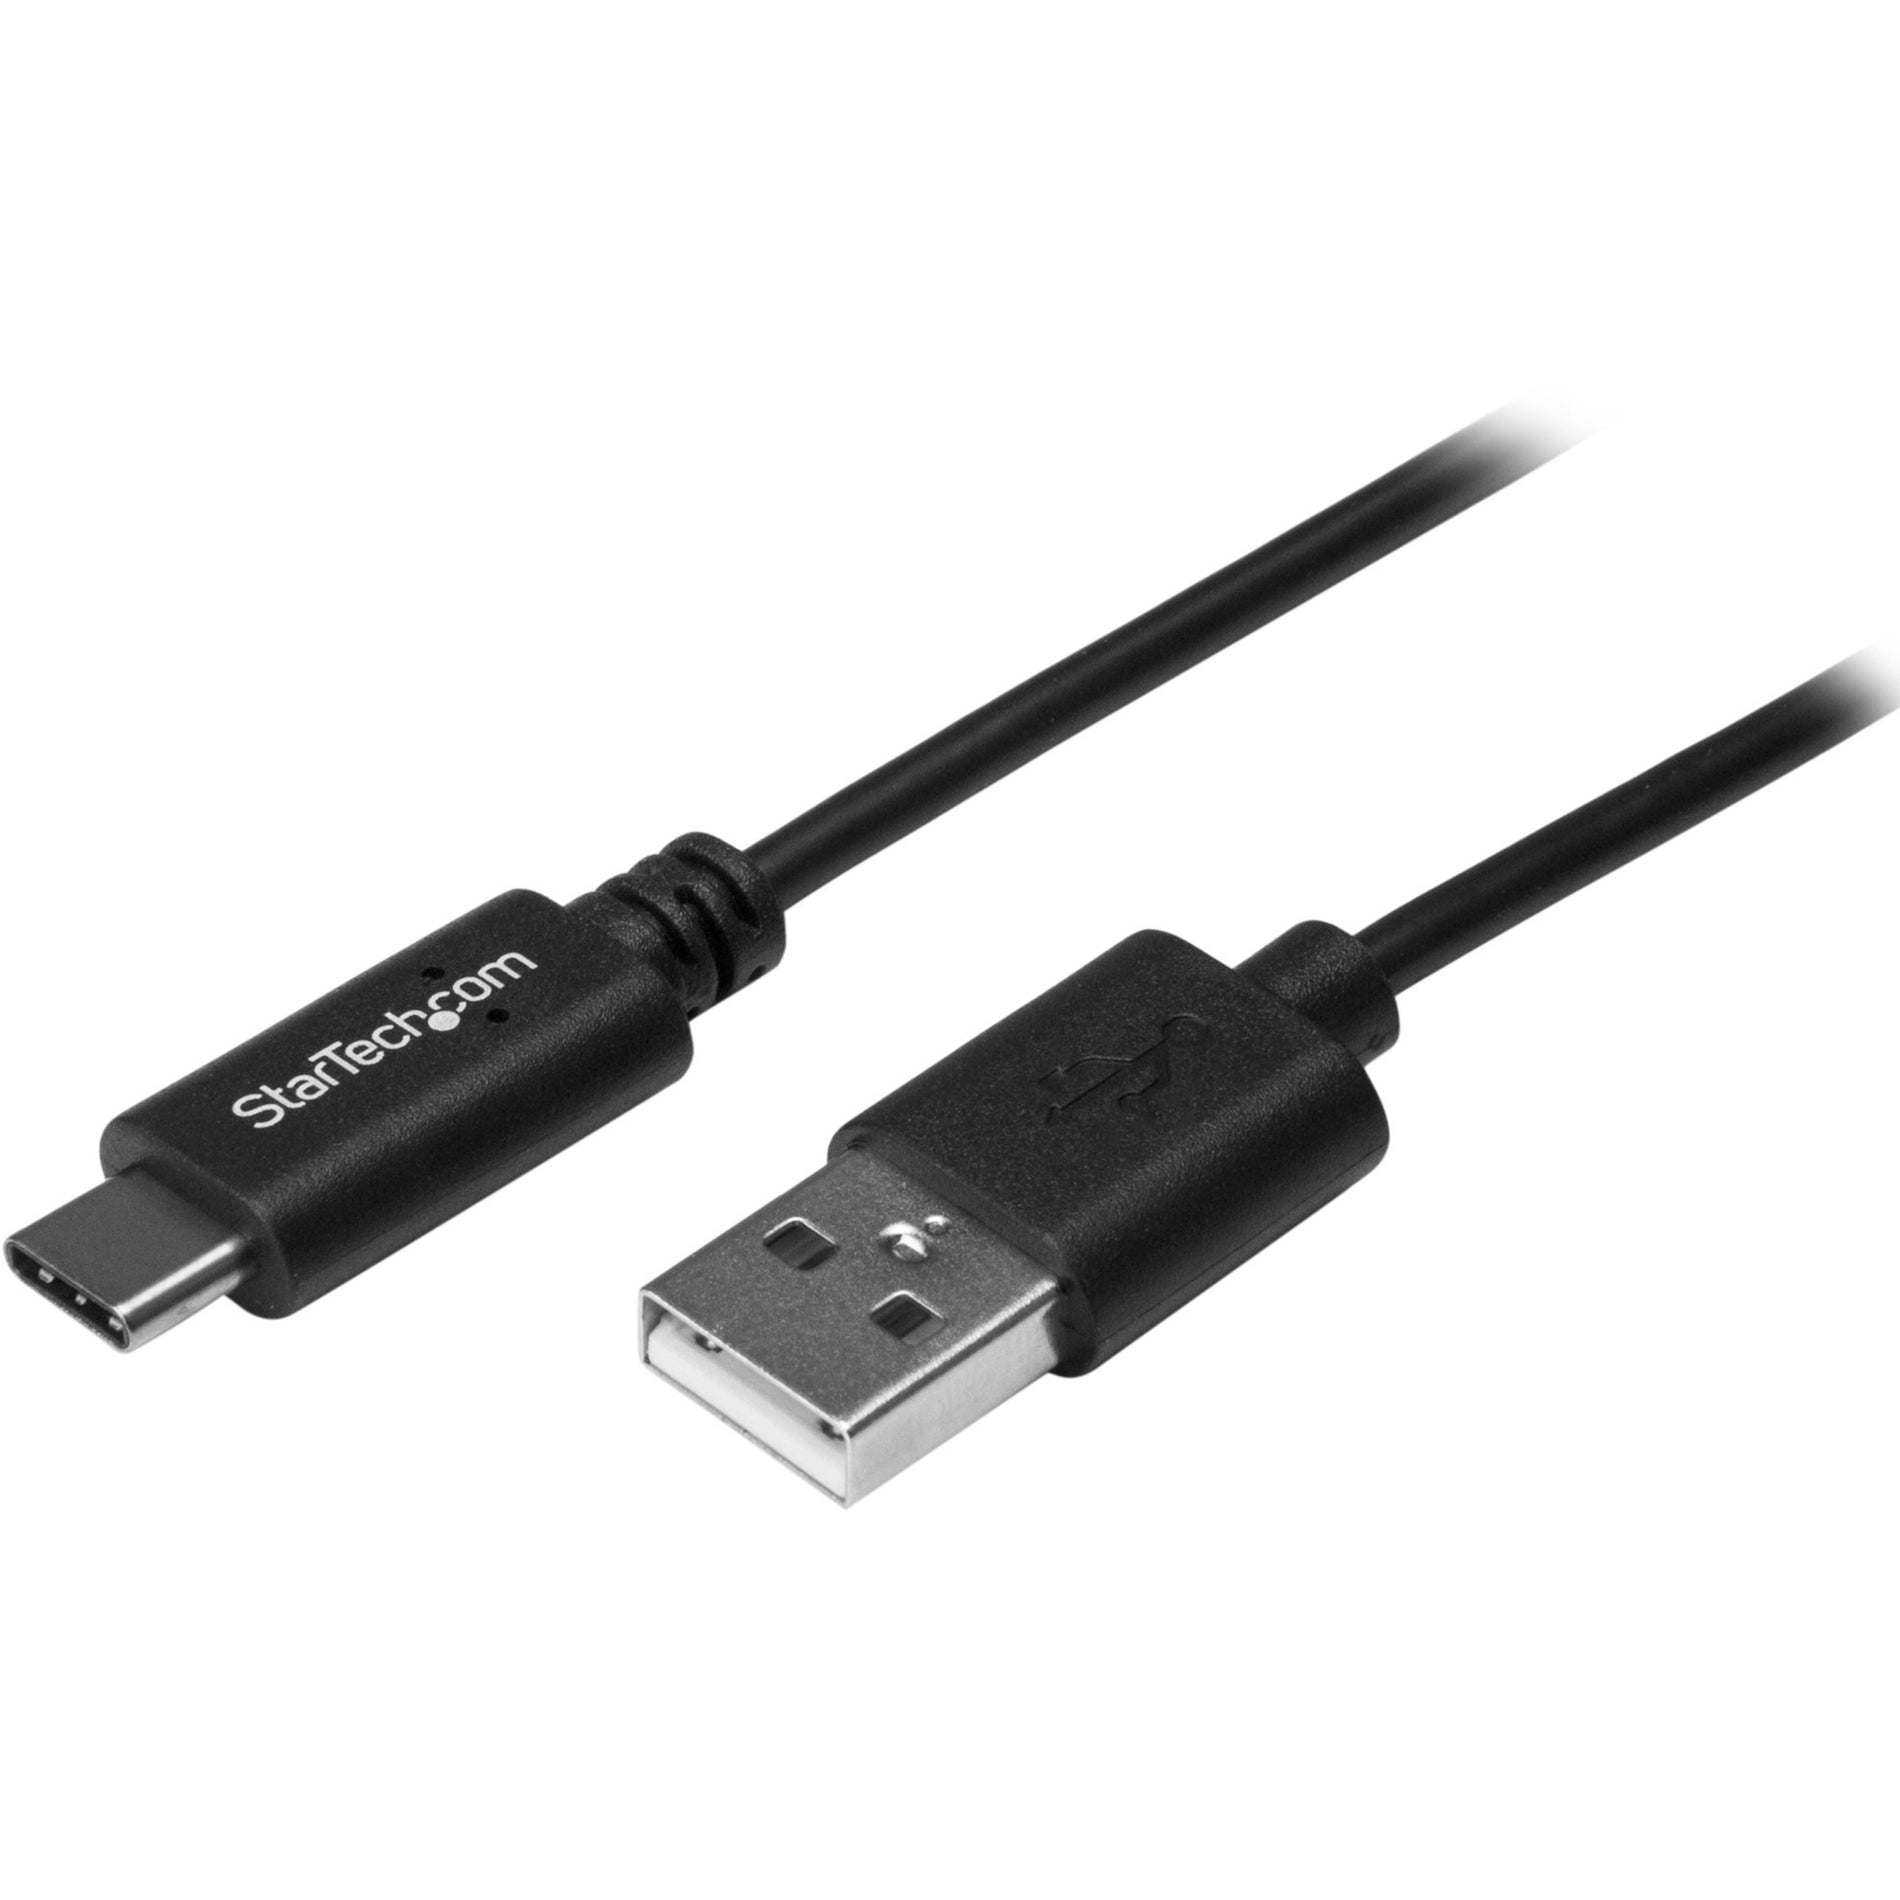 StarTech.com USB2AC2M USB-C to USB-A Cable - M/M - 2m (6 ft.), USB 2.0, Compatible with USB-C Mobile Devices